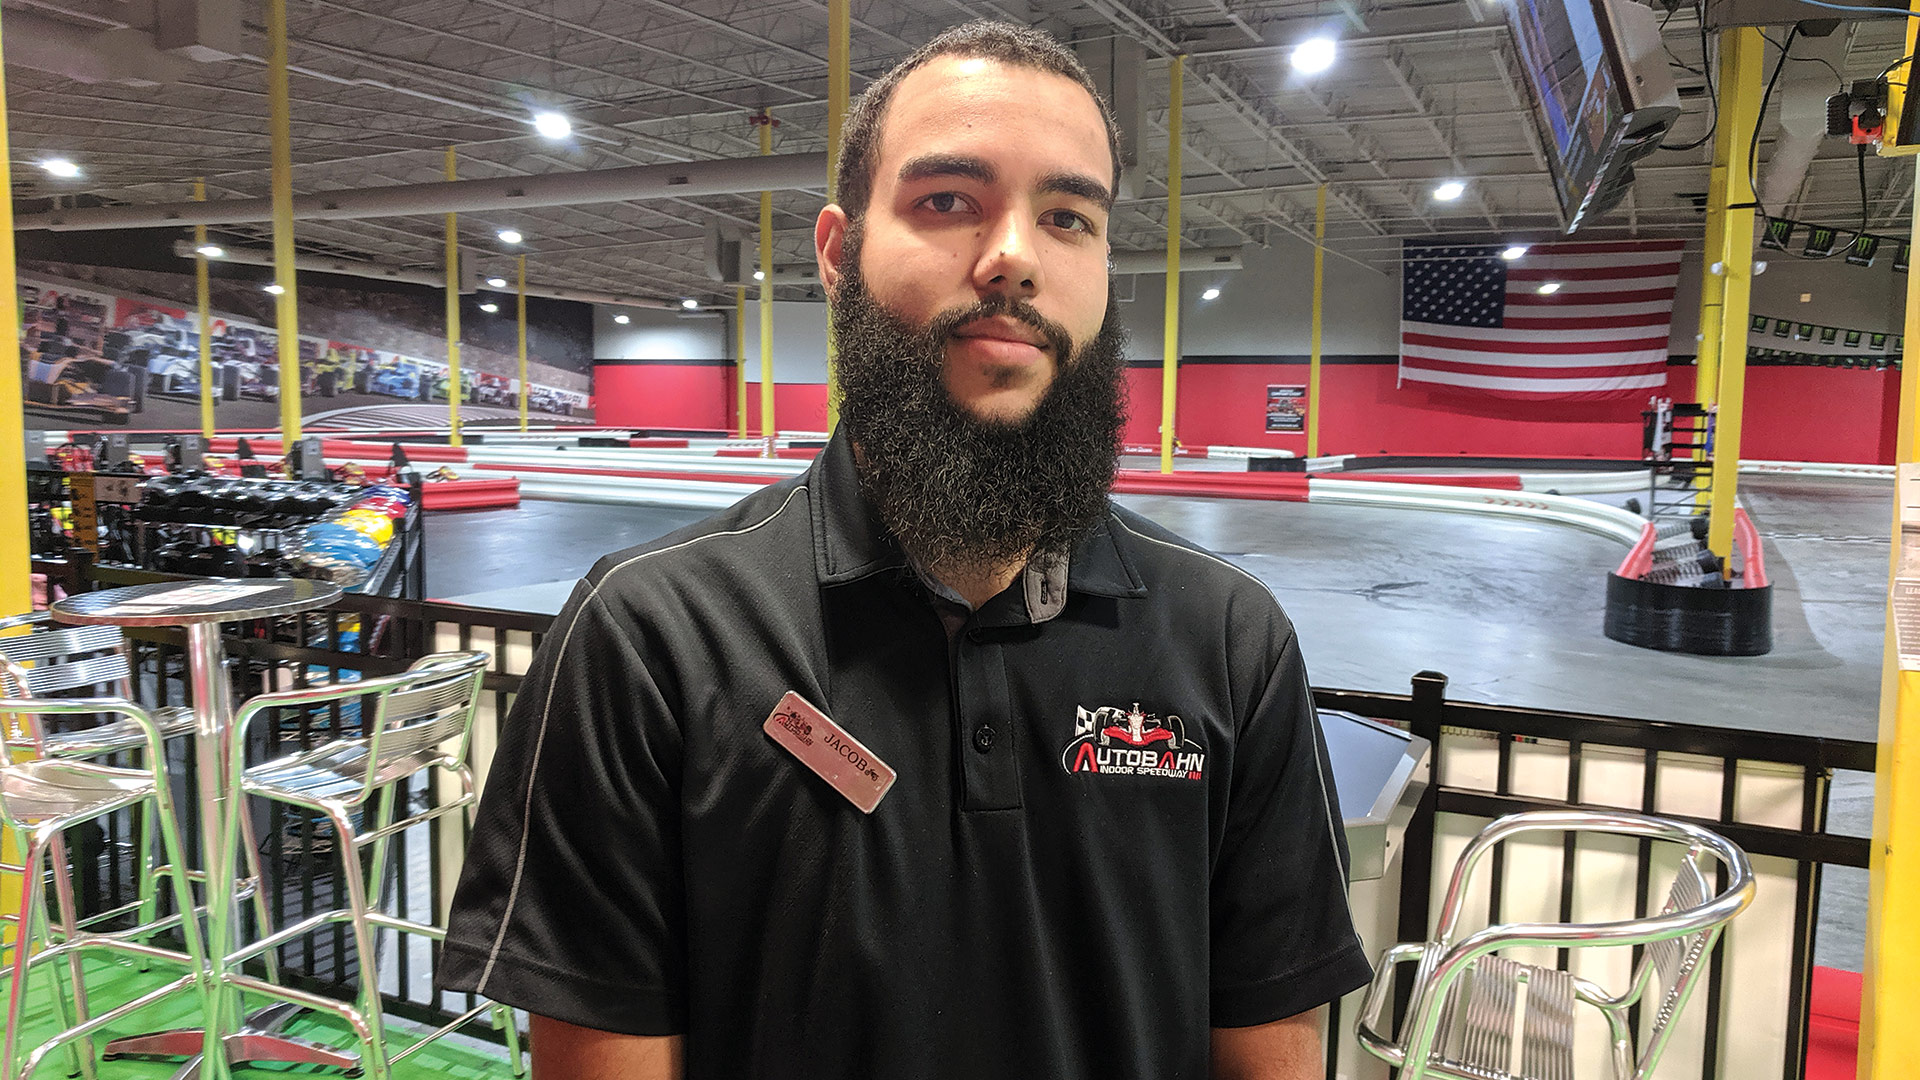 Jake Savageau says shoppers sometimes discover the entertainment options, like Autobahn Indoor Speedway, when they arrive — and then return to spend more time and money in the mall.